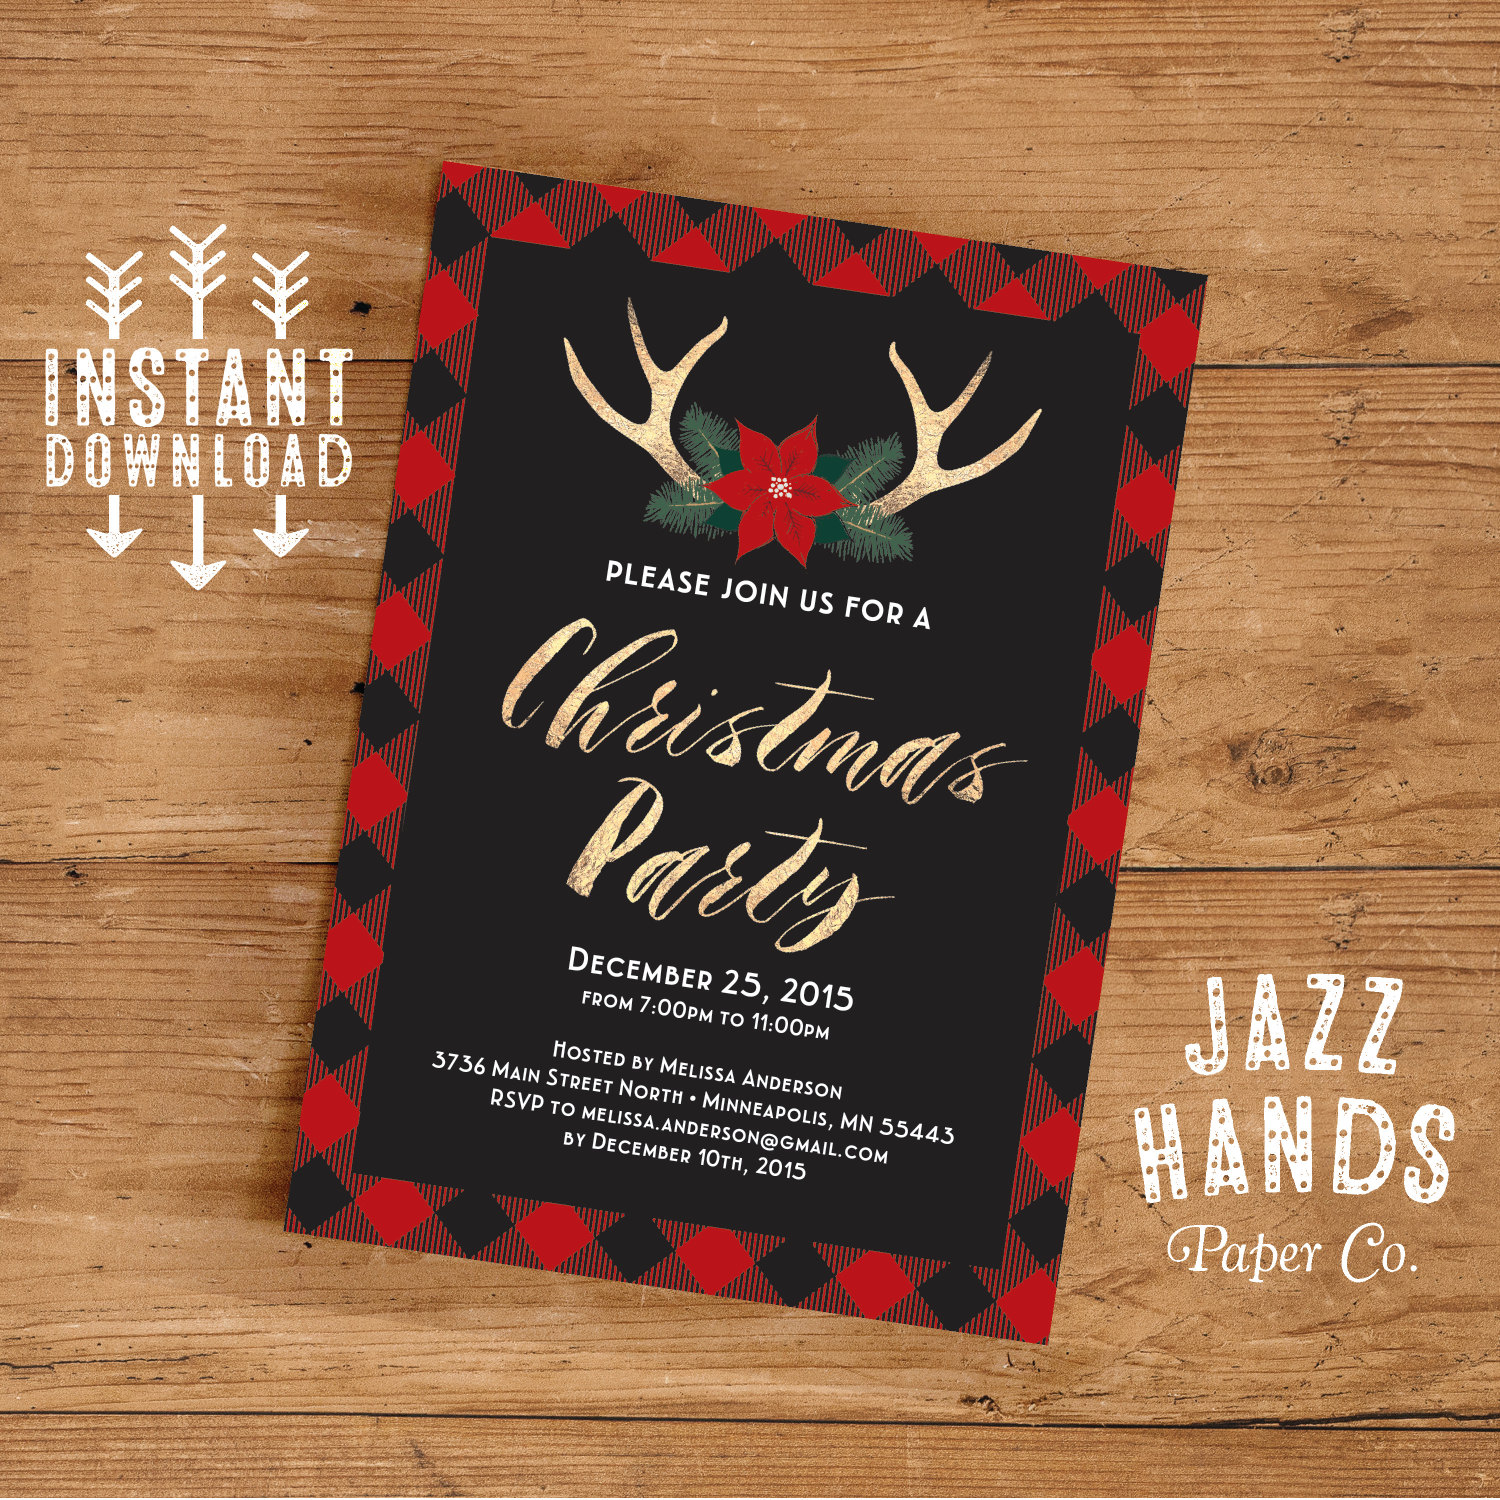 Proposal For Christmas Party Template / Free Holiday Party Invitations